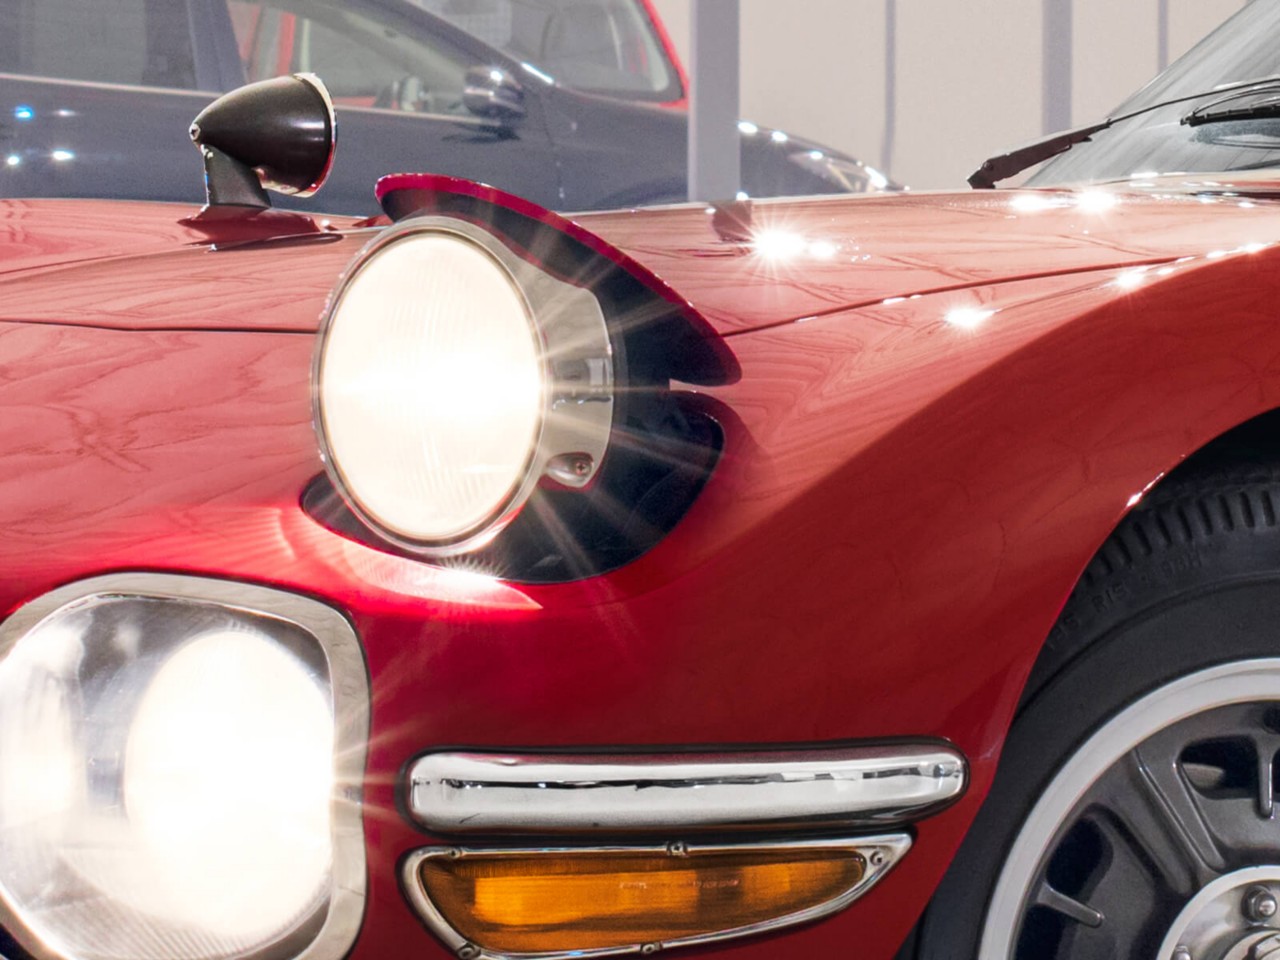 Toyota 2000GT car in red headlights